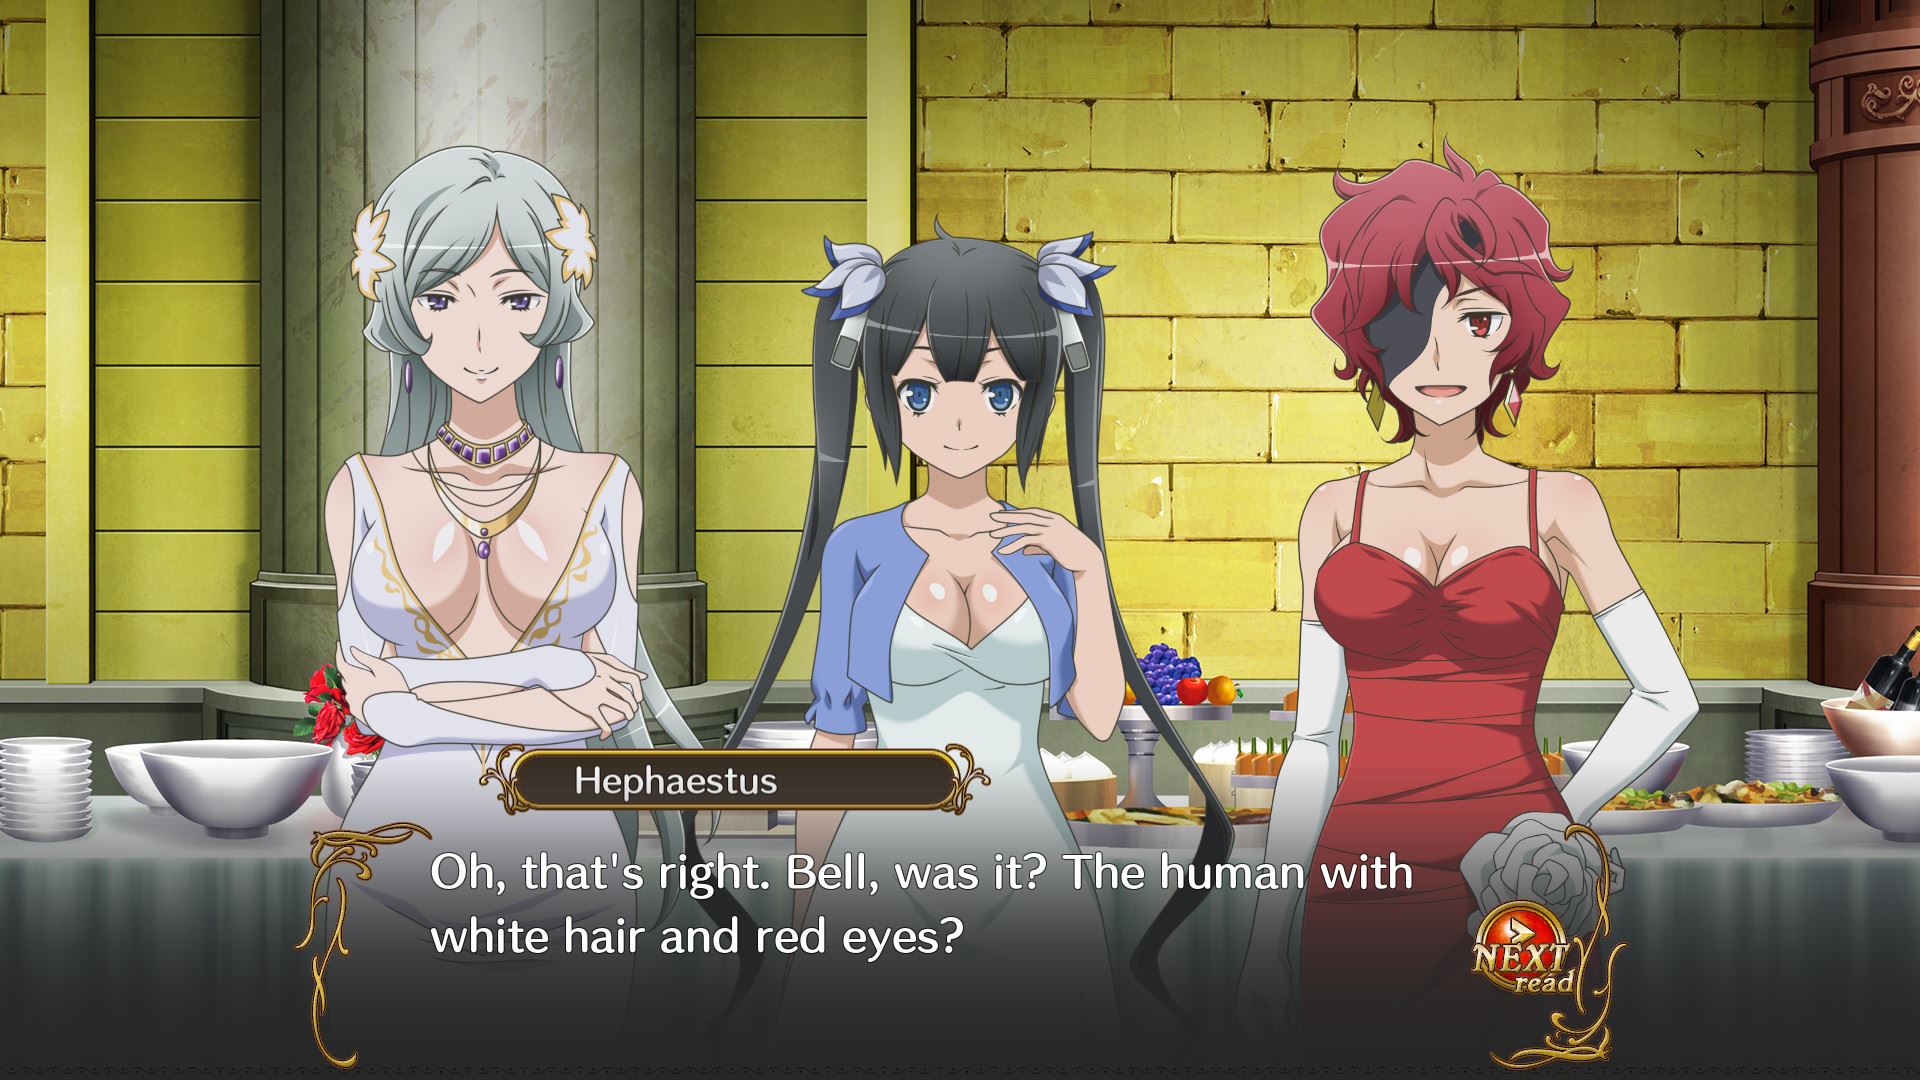 Girls in a dungeon porn animation game